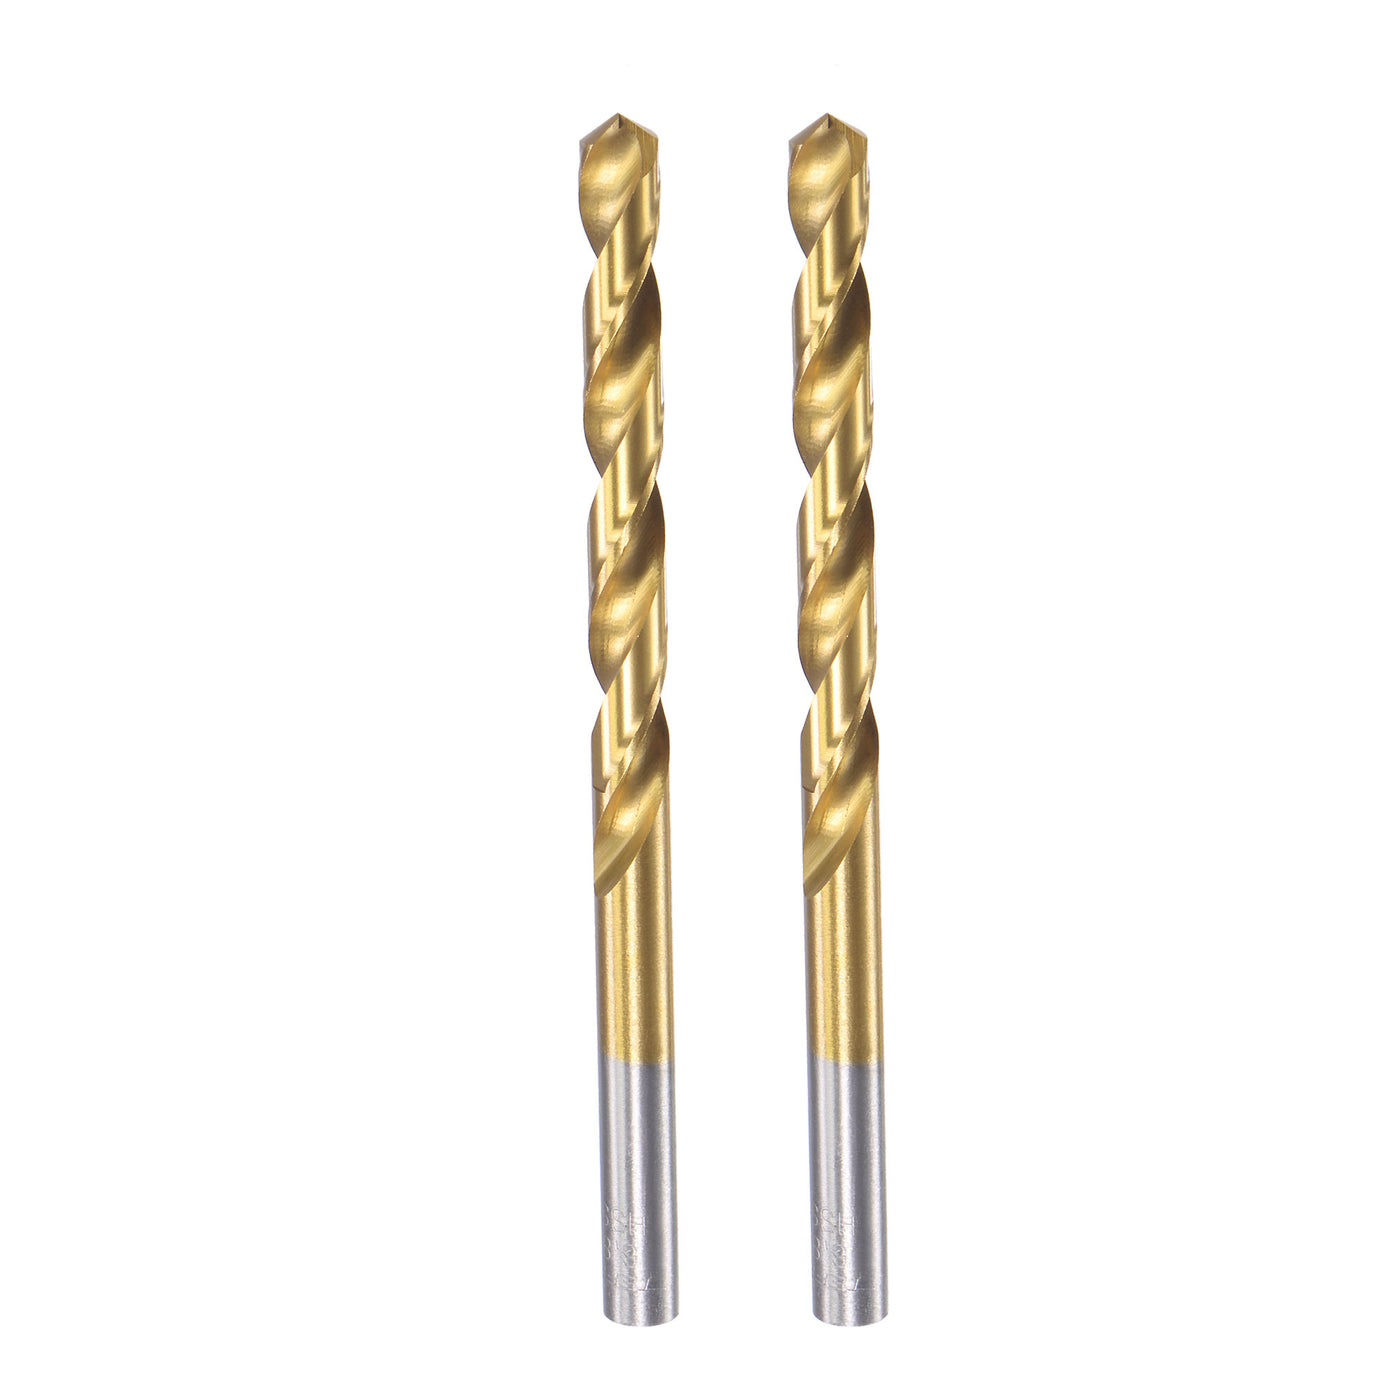 uxcell Uxcell High Speed Steel Twist Drill Bit 6.8mm Fully Ground Titanium Coated 2 Pcs